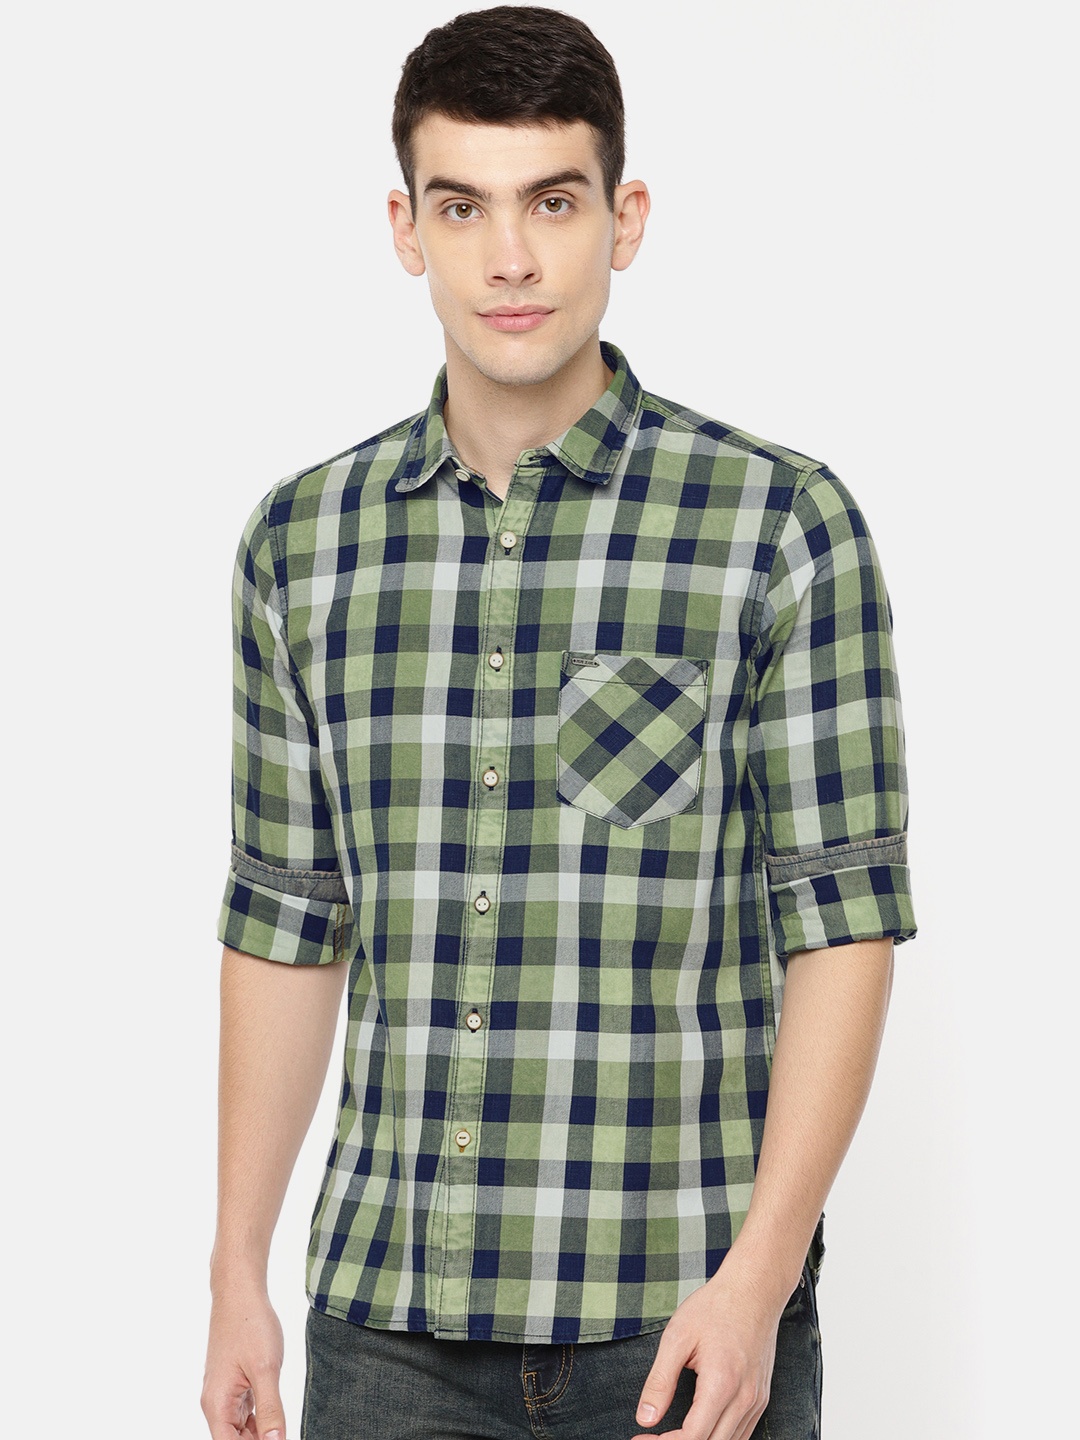 

Pepe Jeans Men Olive Green & Navy Blue Regular Fit Checked Casual Shirt